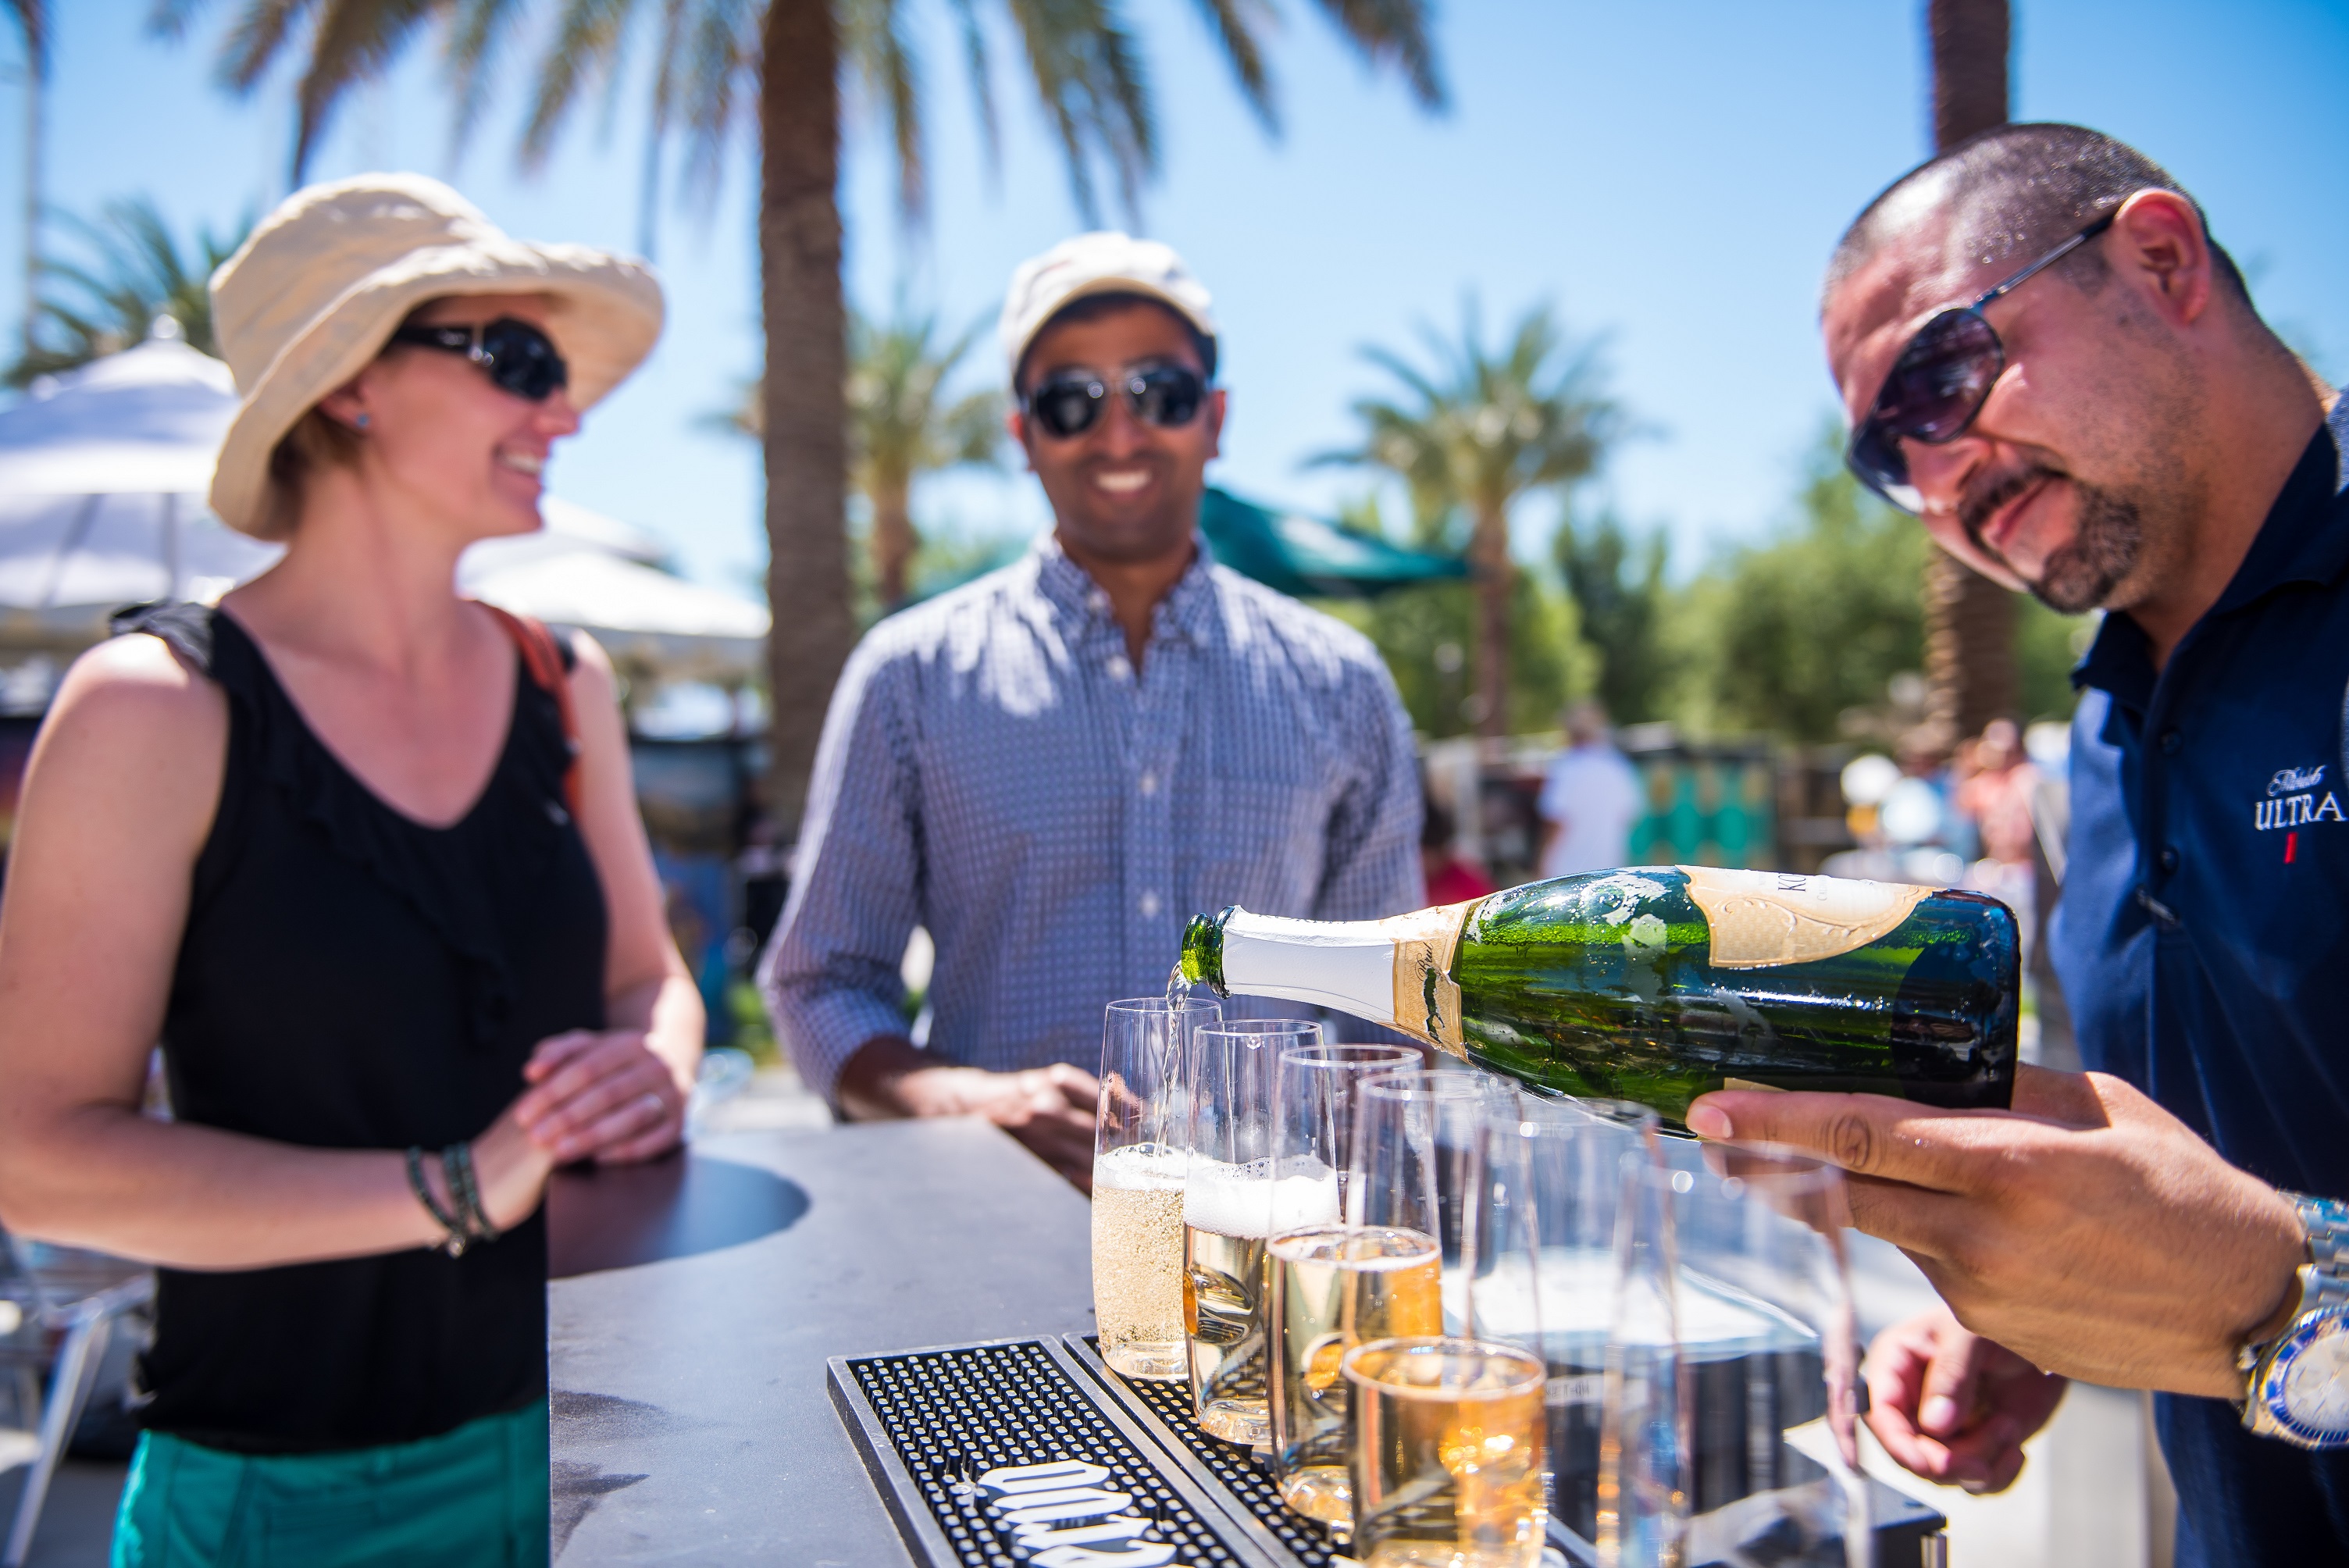 Festivalgoers enjoy the Champagne Circle Bar at the Indian Wells Arts Festival